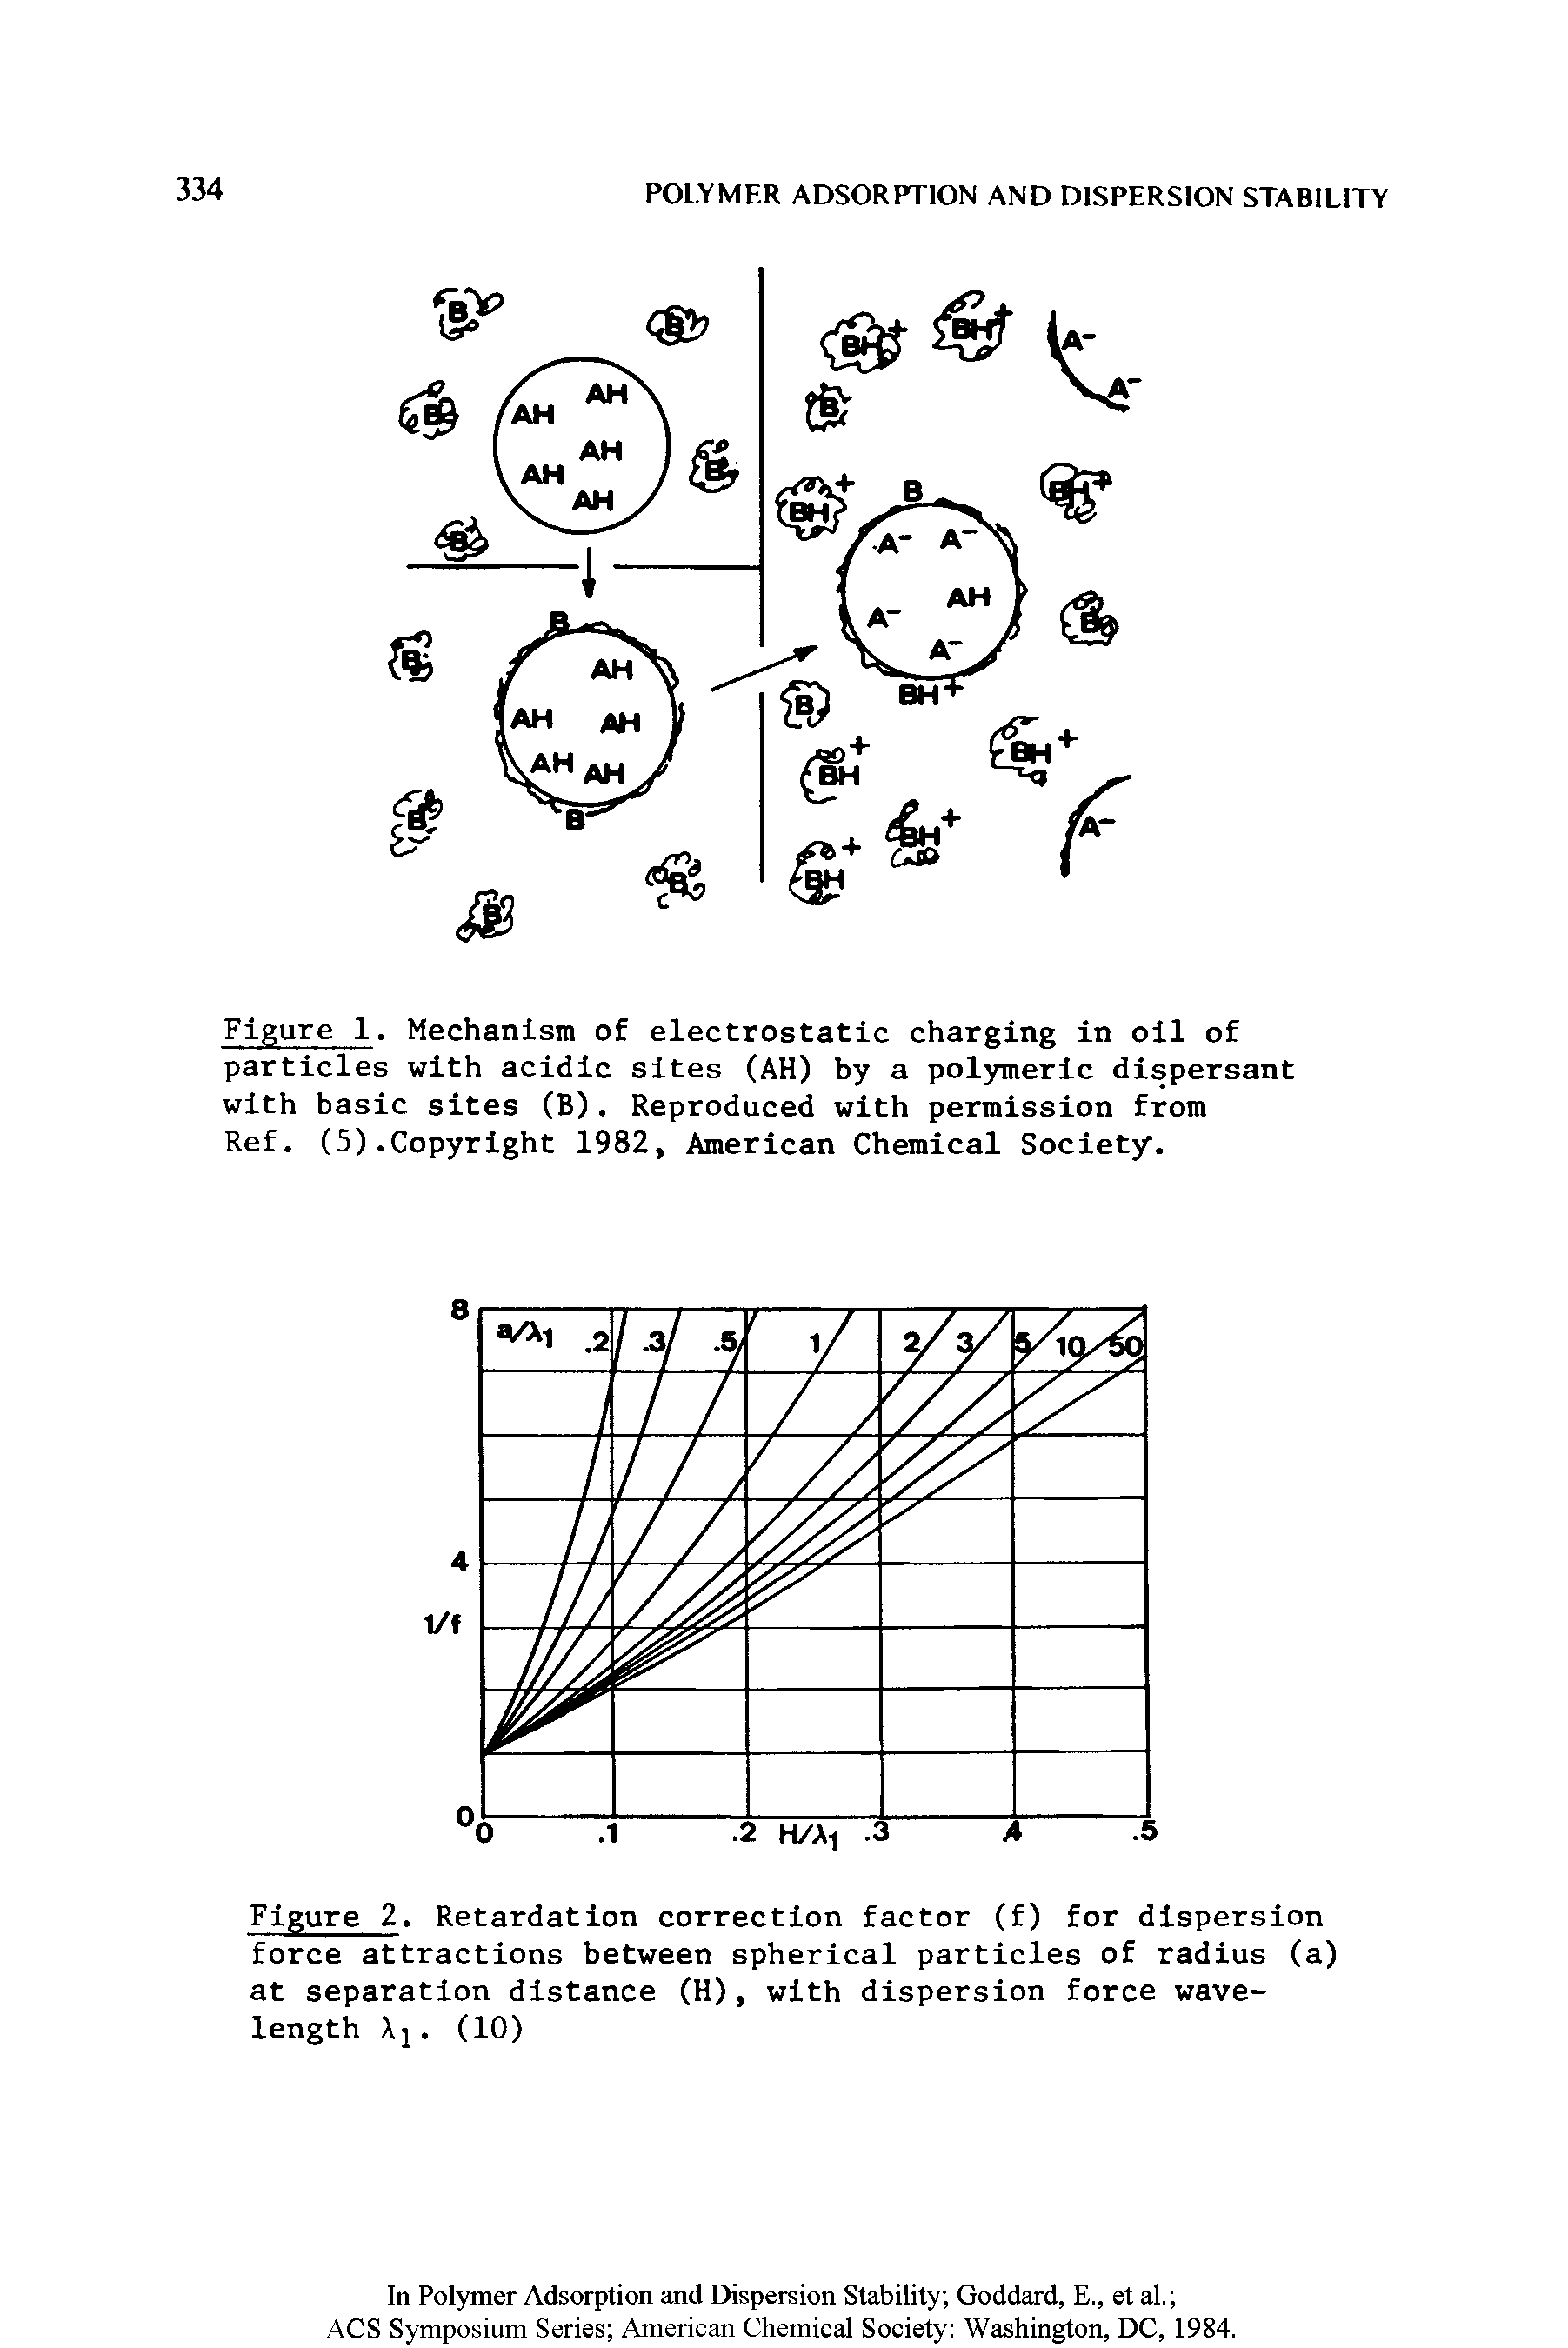 Figure 2. Retardation correction factor (f) for dispersion force attractions between spherical particles of radius (a) at separation distance (H), with dispersion force wavelength Xj. (10)...